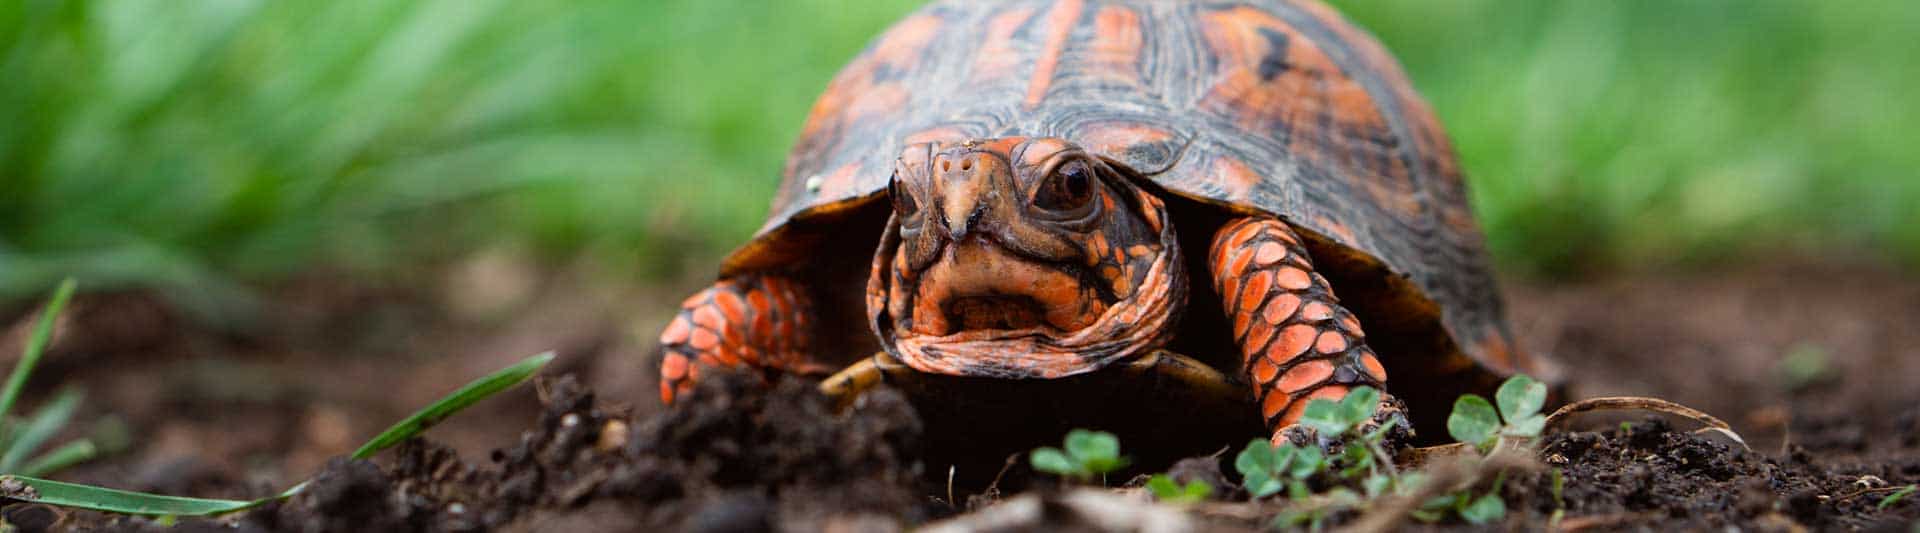 14 Different Types of Turtles and Turtle Species